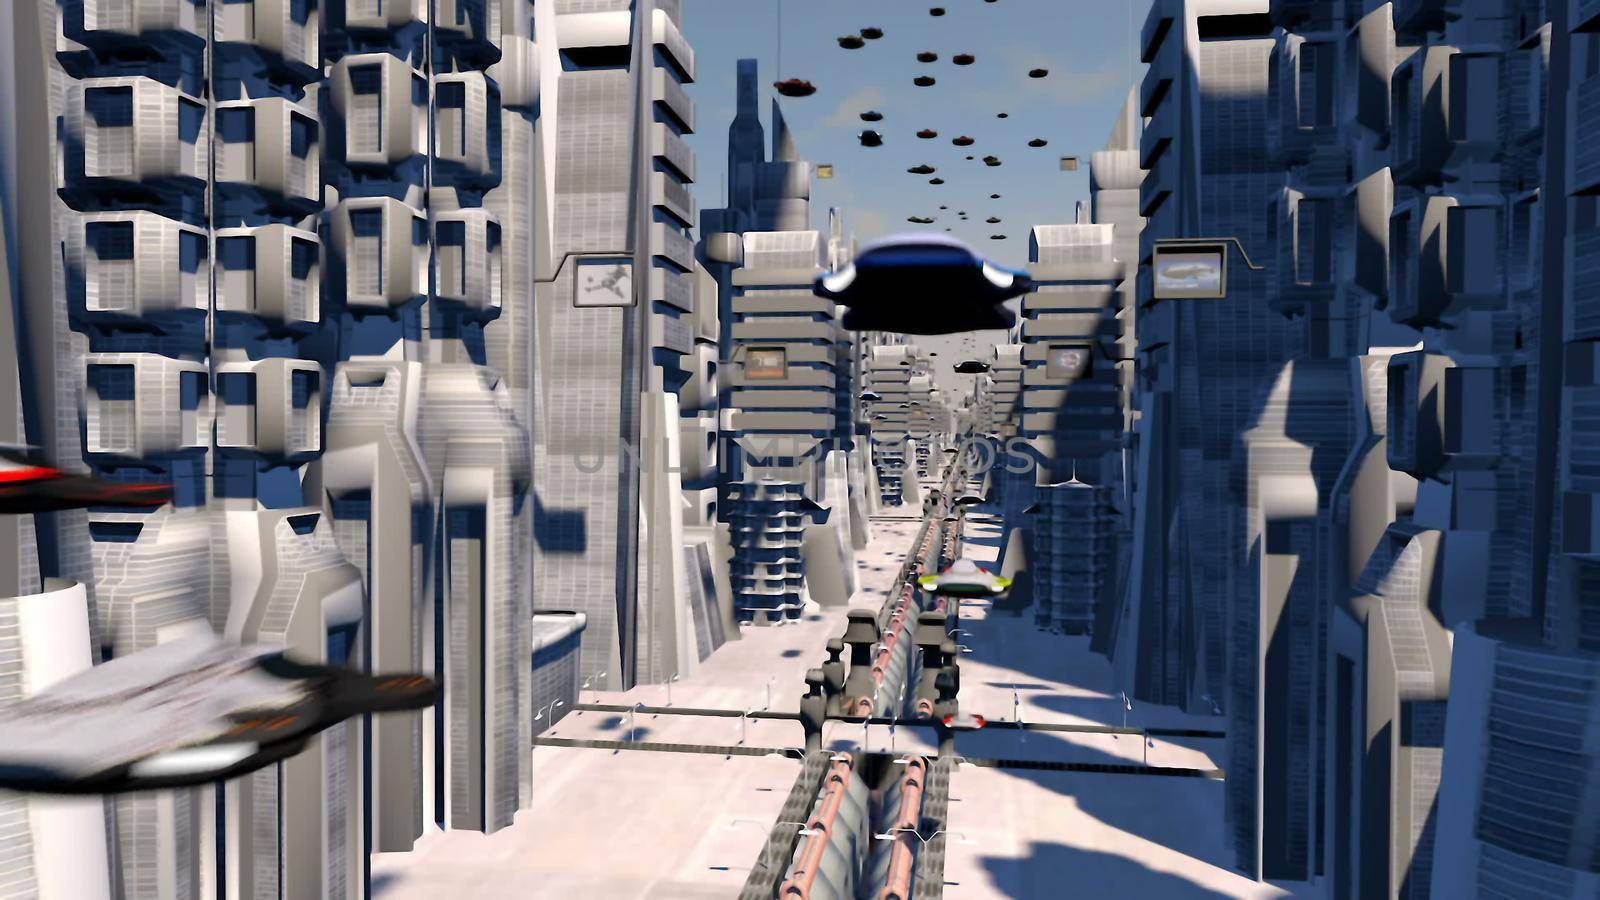 Cybernetic City with Futuristic Buildings 3D rendering by designprojects